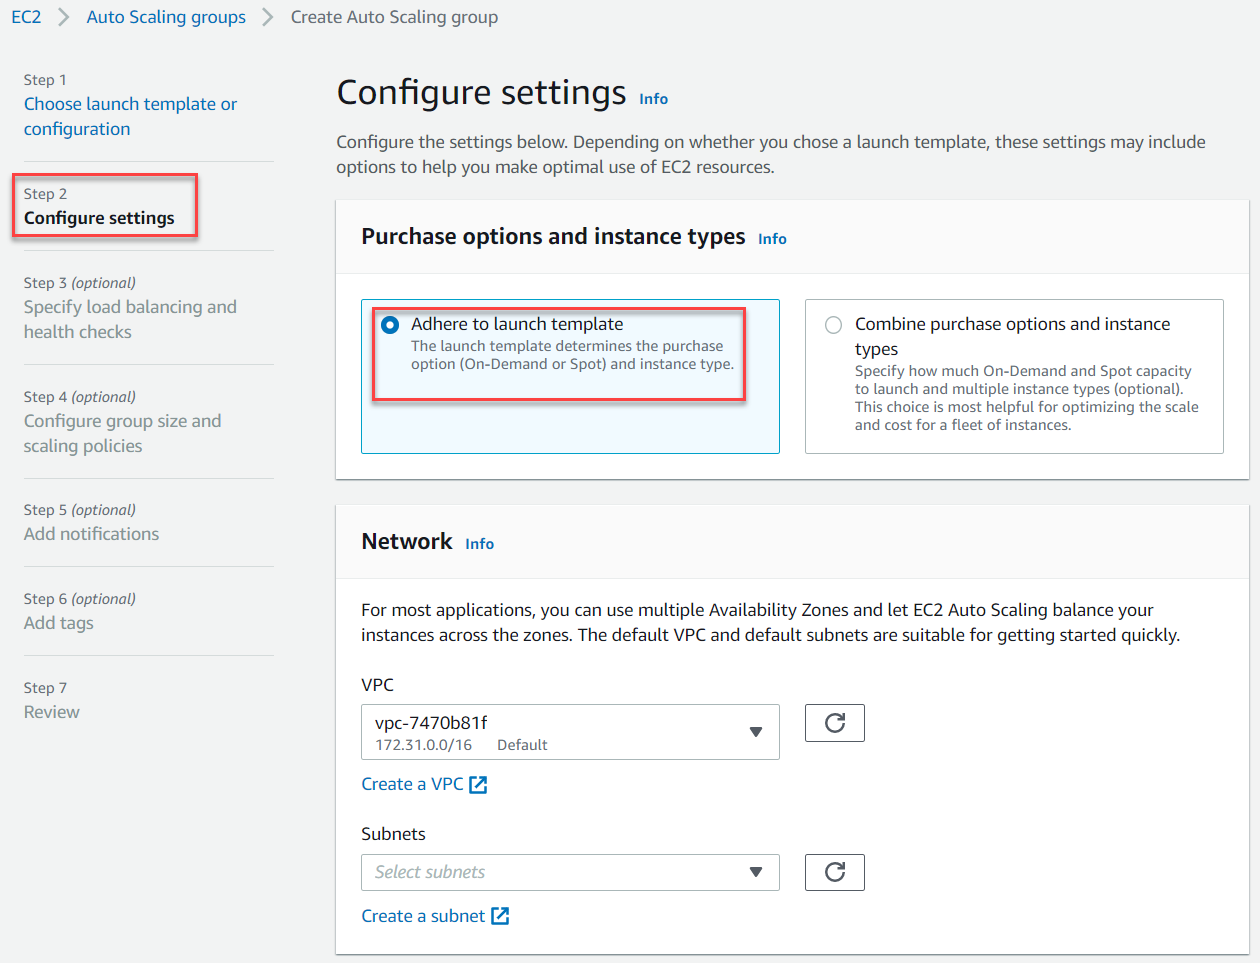 Configure Settings - Adhering to the launch template